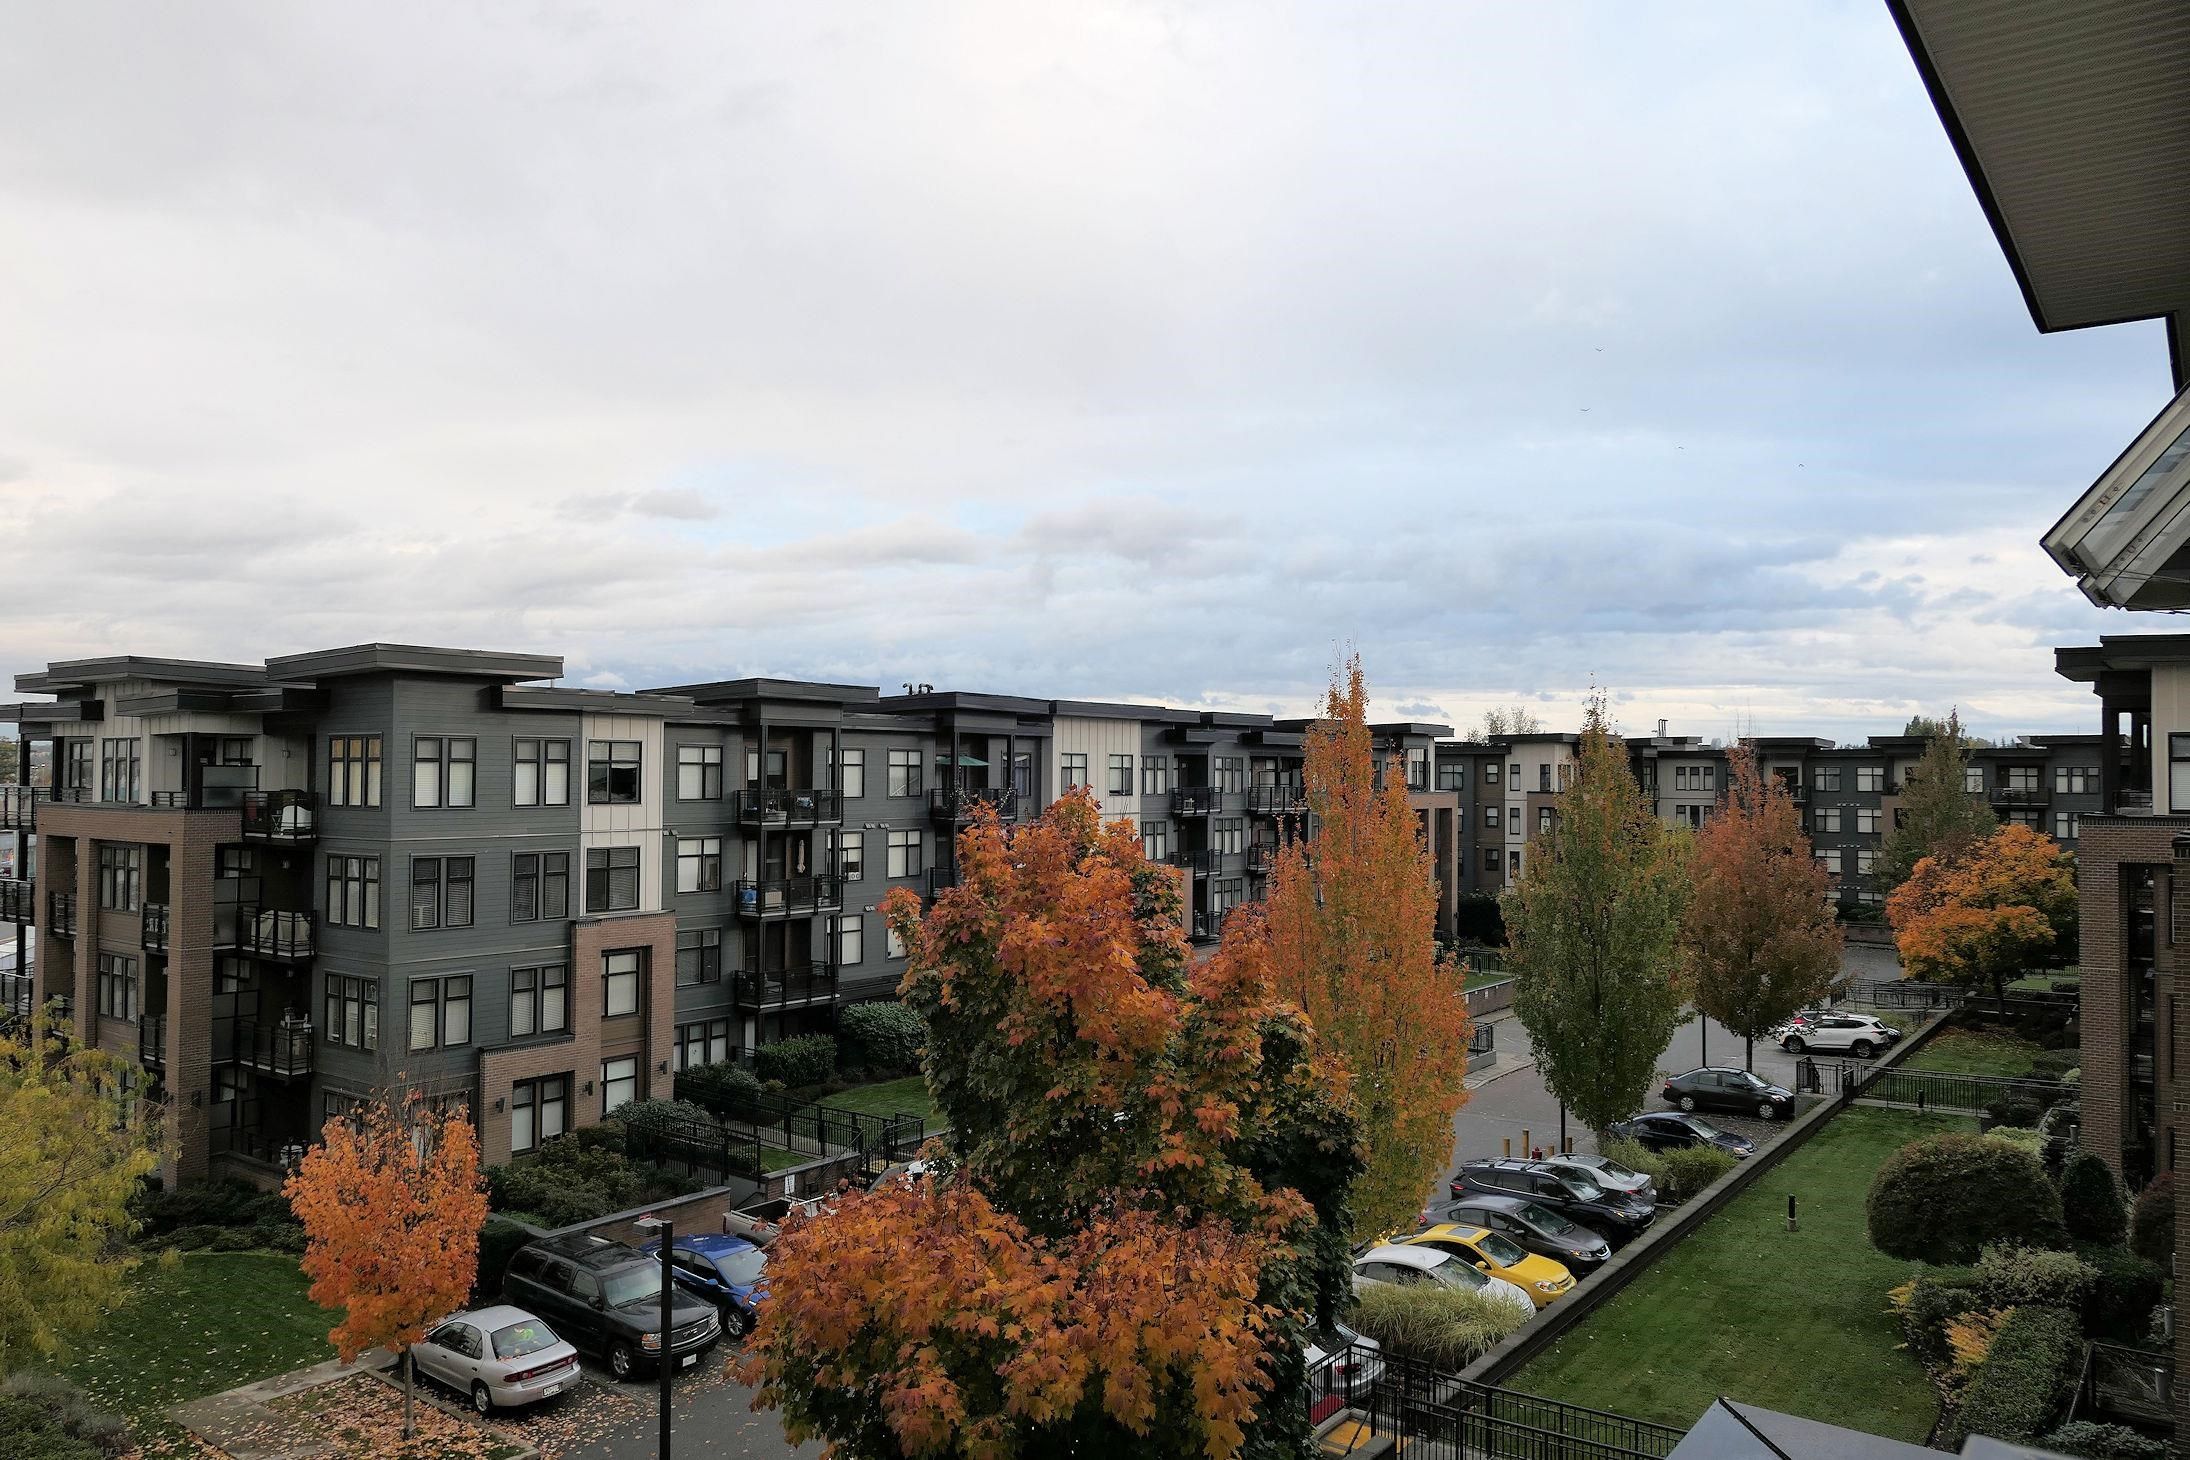 Photo 11: Photos: 414 20058 FRASER HIGHWAY in Langley: Langley City Condo for sale : MLS®# R2627882